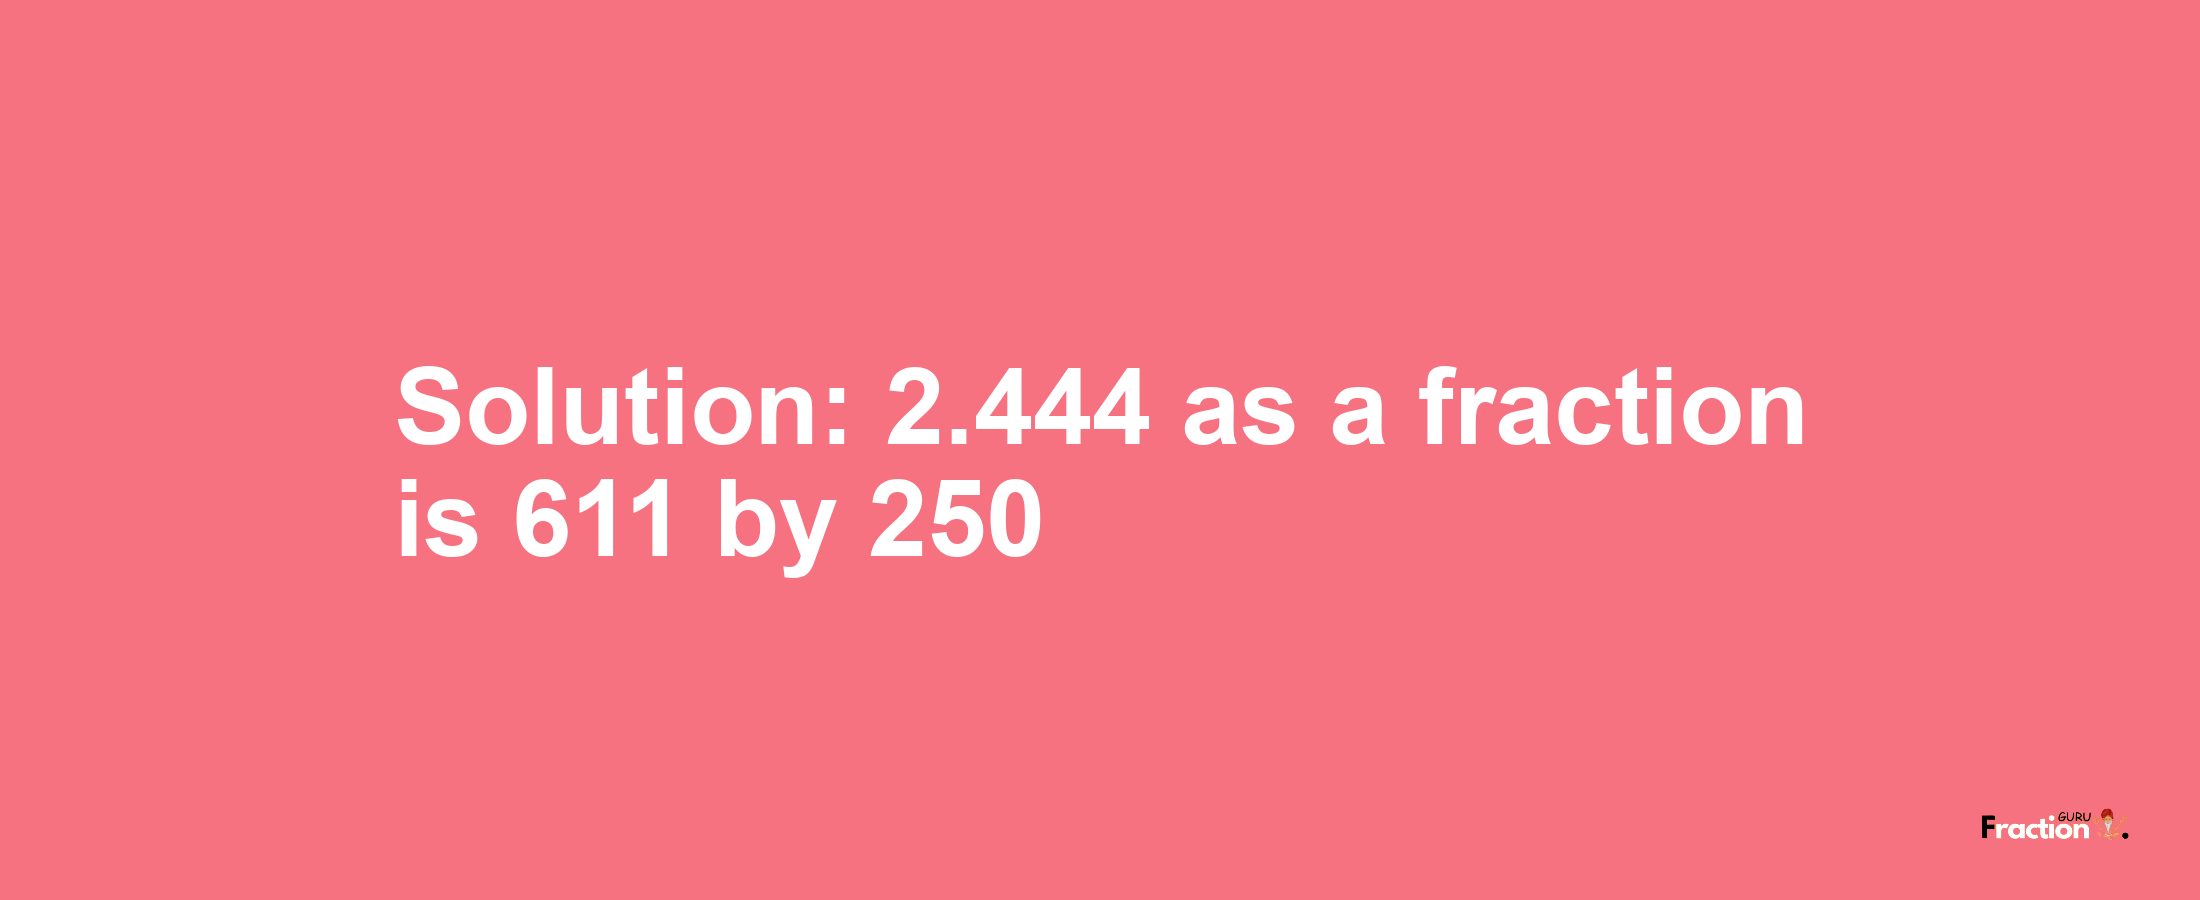 Solution:2.444 as a fraction is 611/250